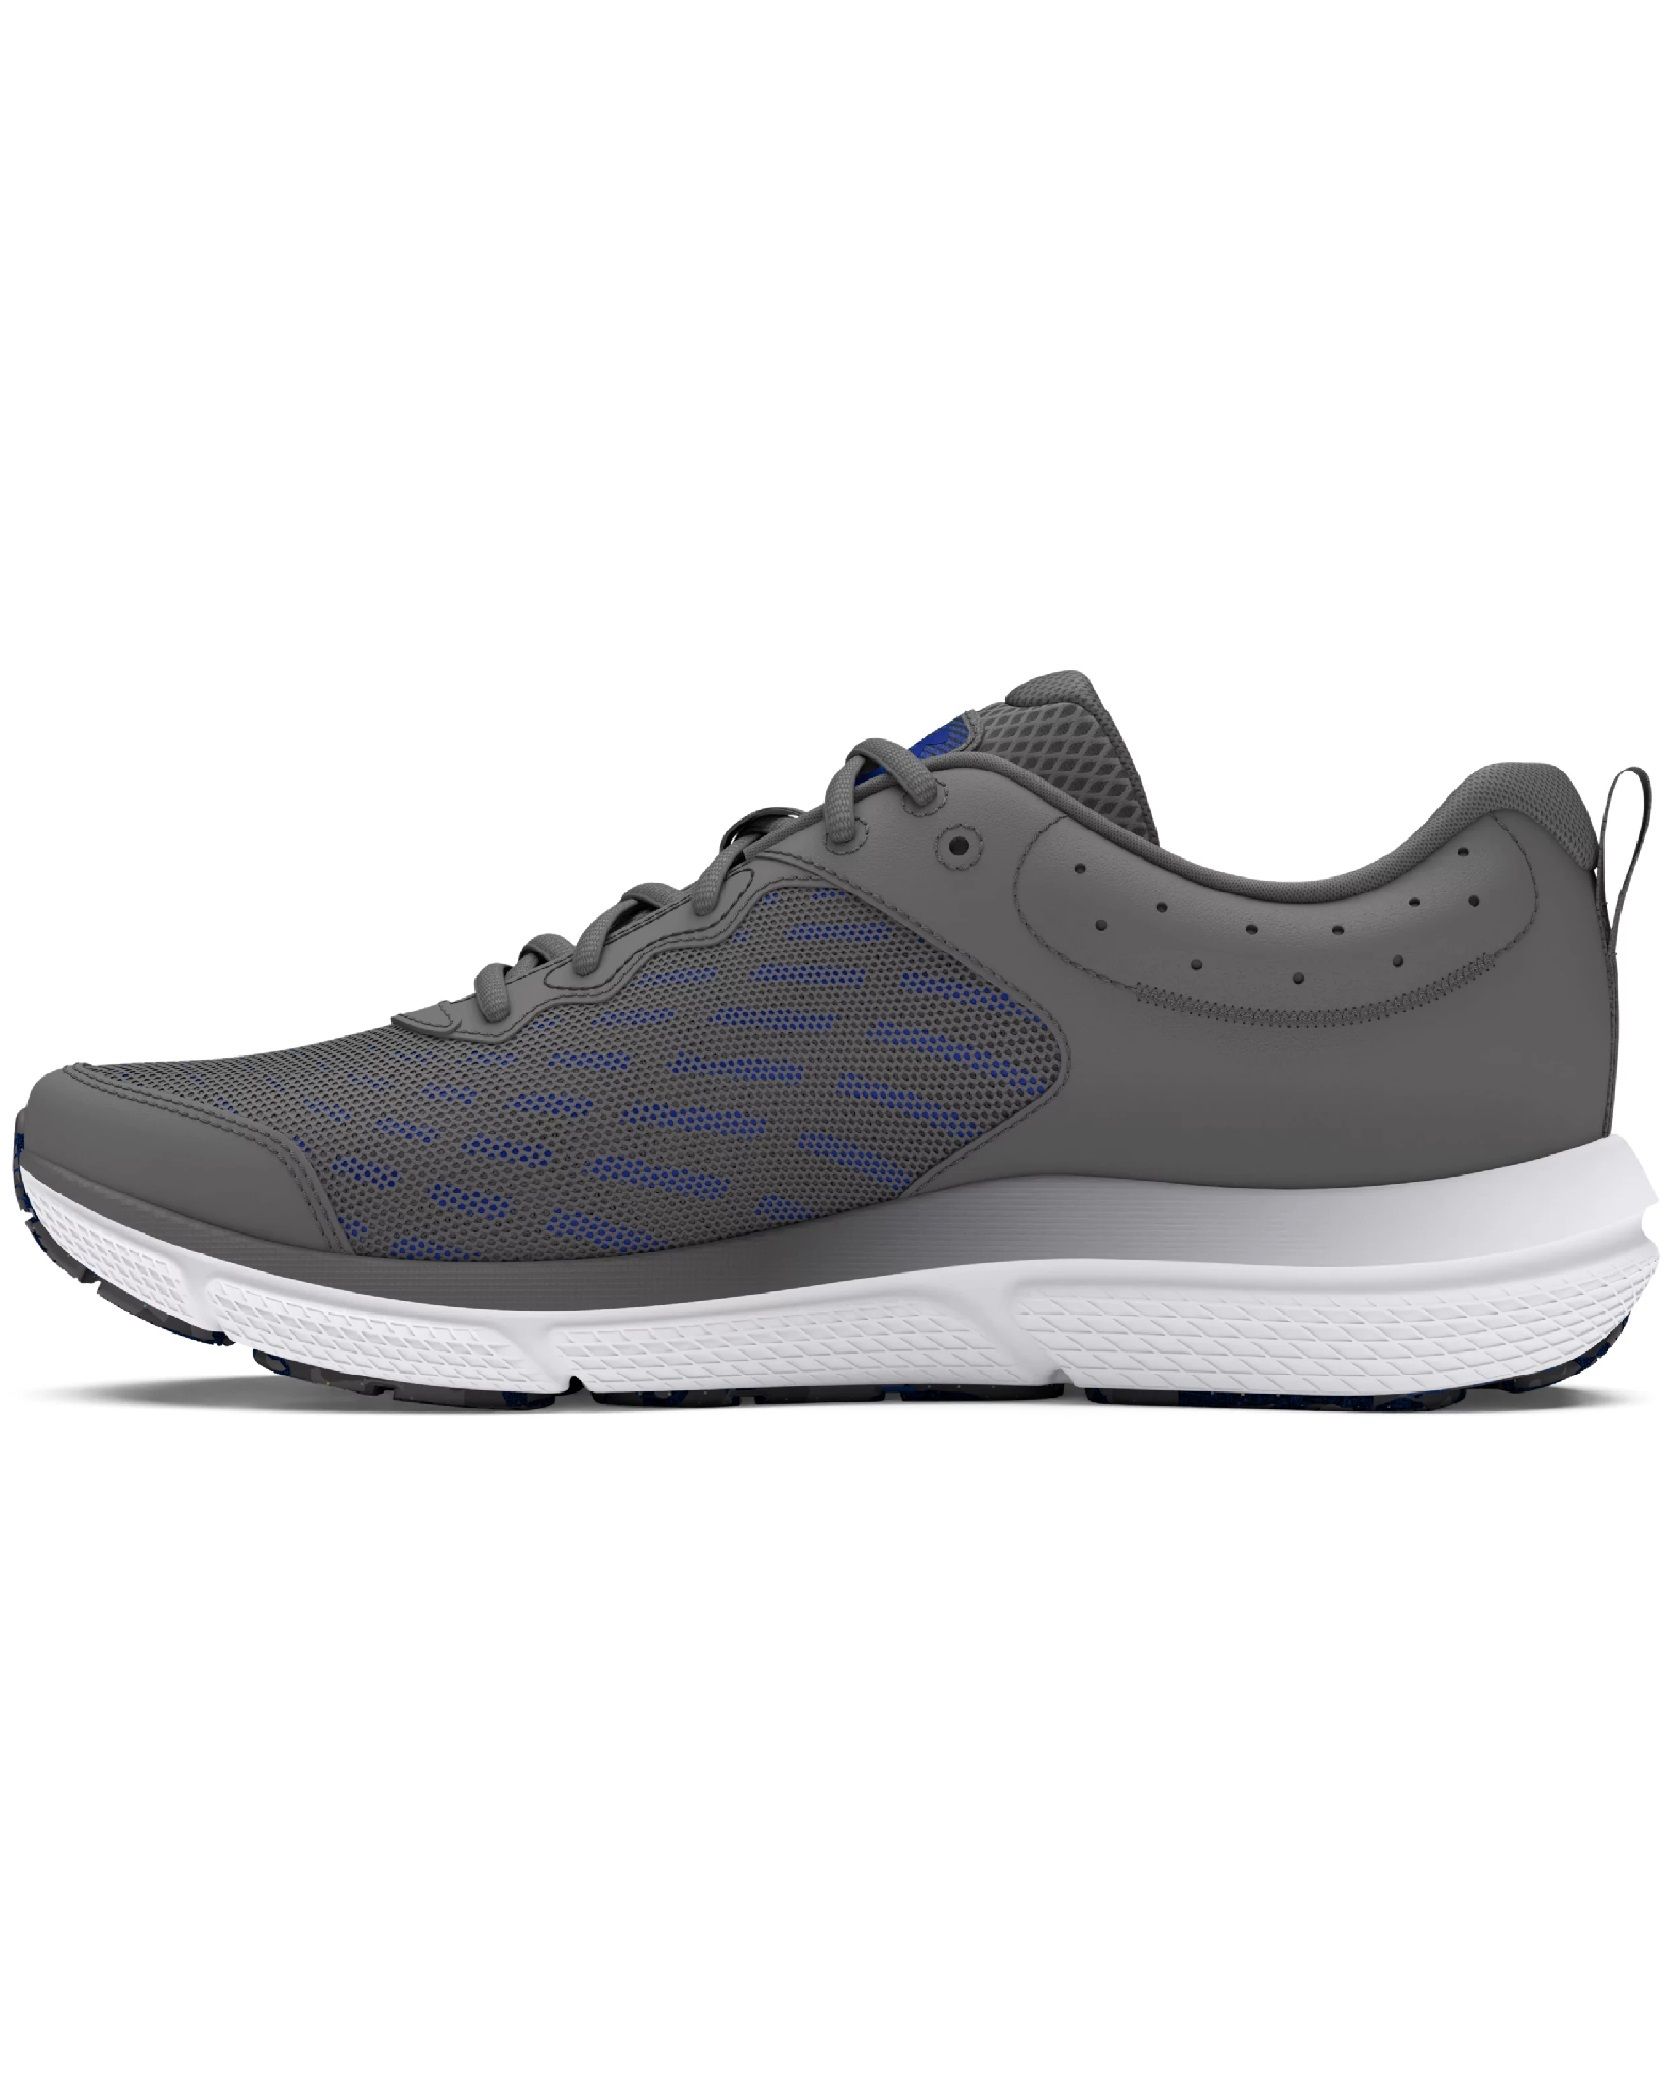 Under Armour Men's Charged Assert 10 Wide (4E) Running Shoes - Black, 8.5